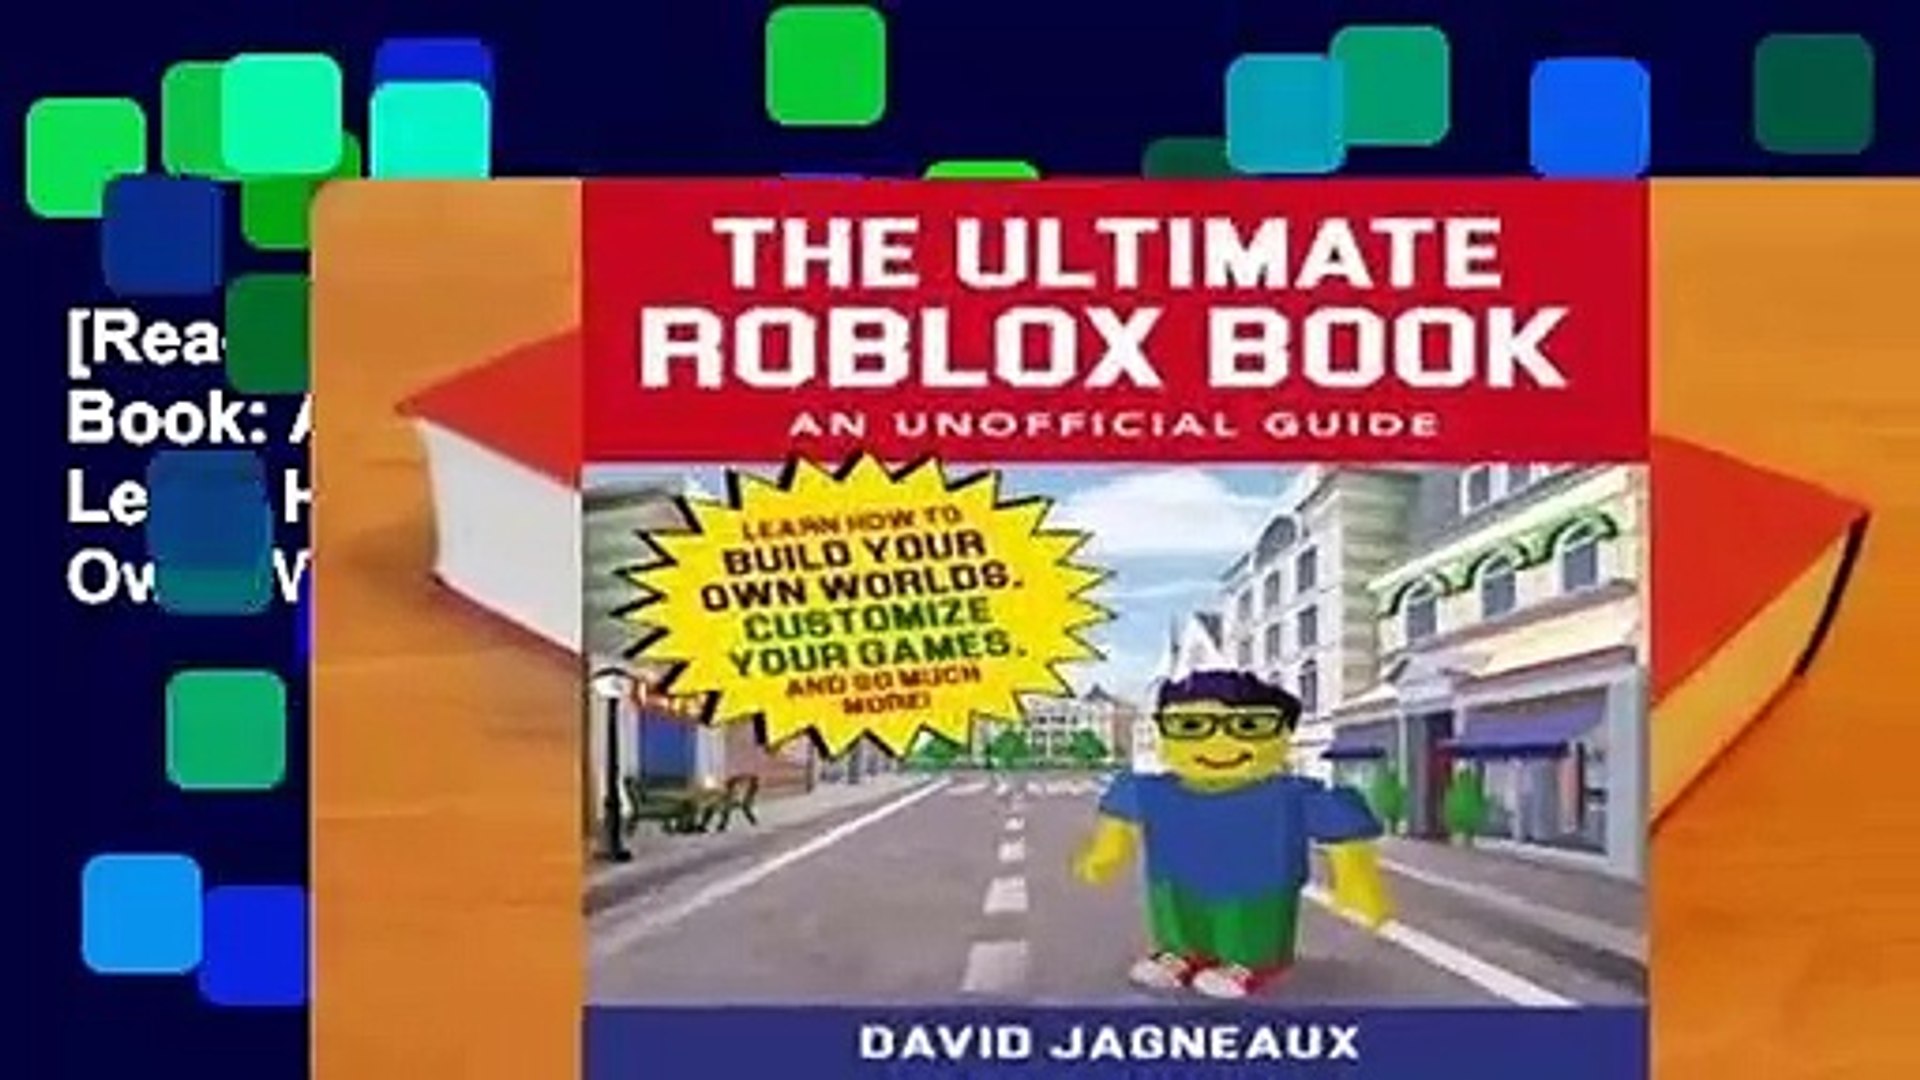 Read The Ultimate Roblox Book An Unofficial Guide Learn How To Build Your Own Worlds - the ultimate roblox book an unofficial guide david